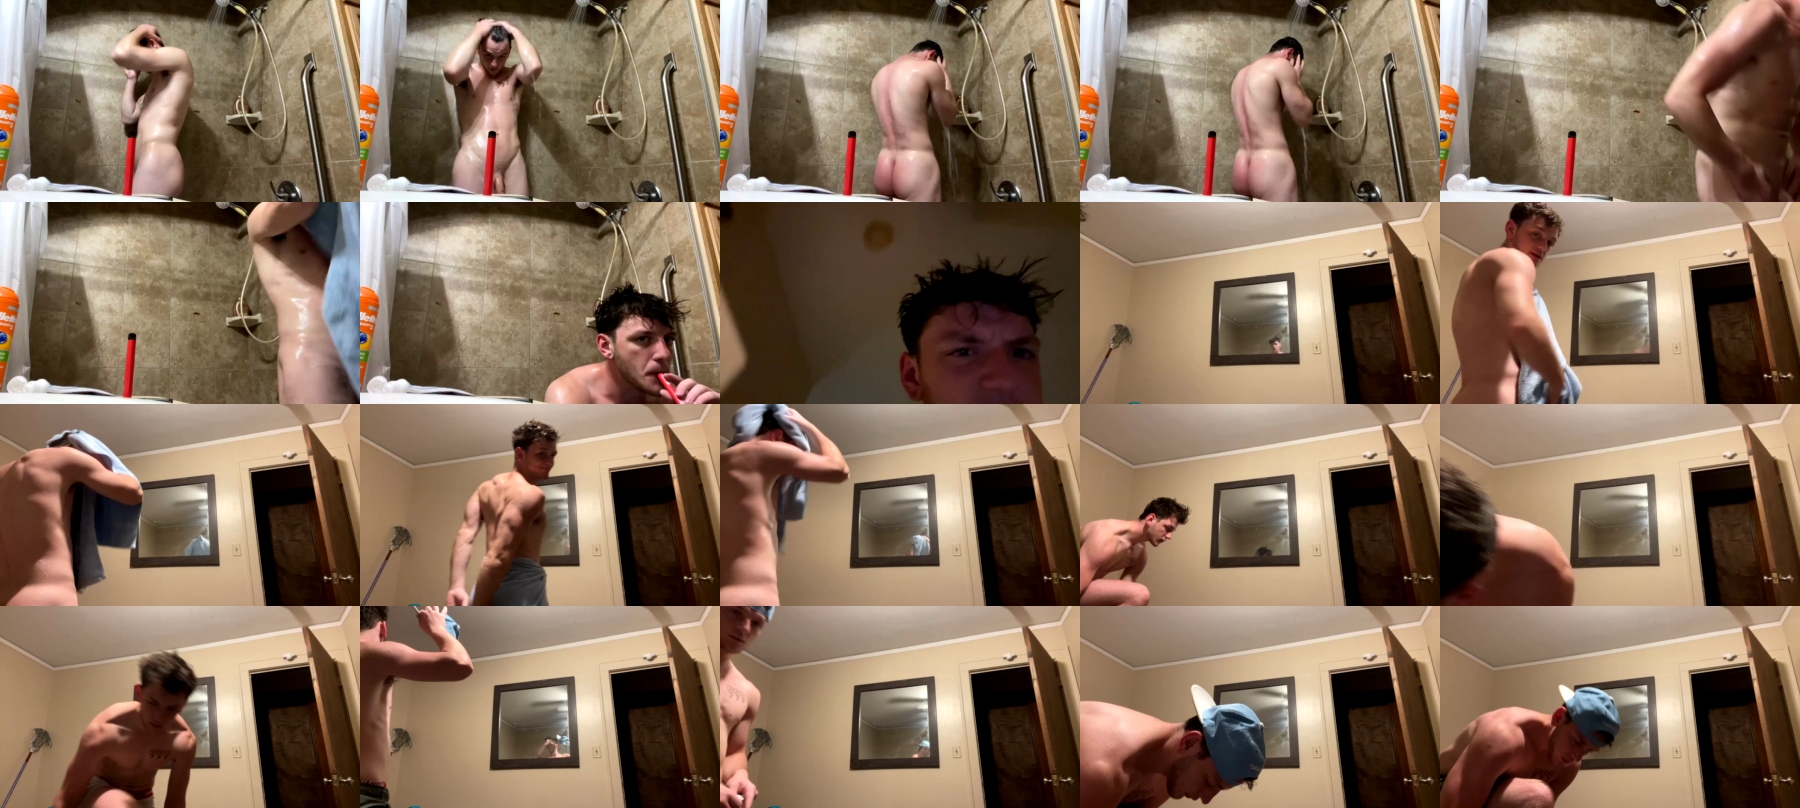 Sexylax69 Naked CAM SHOW @ Chaturbate 24-08-2021